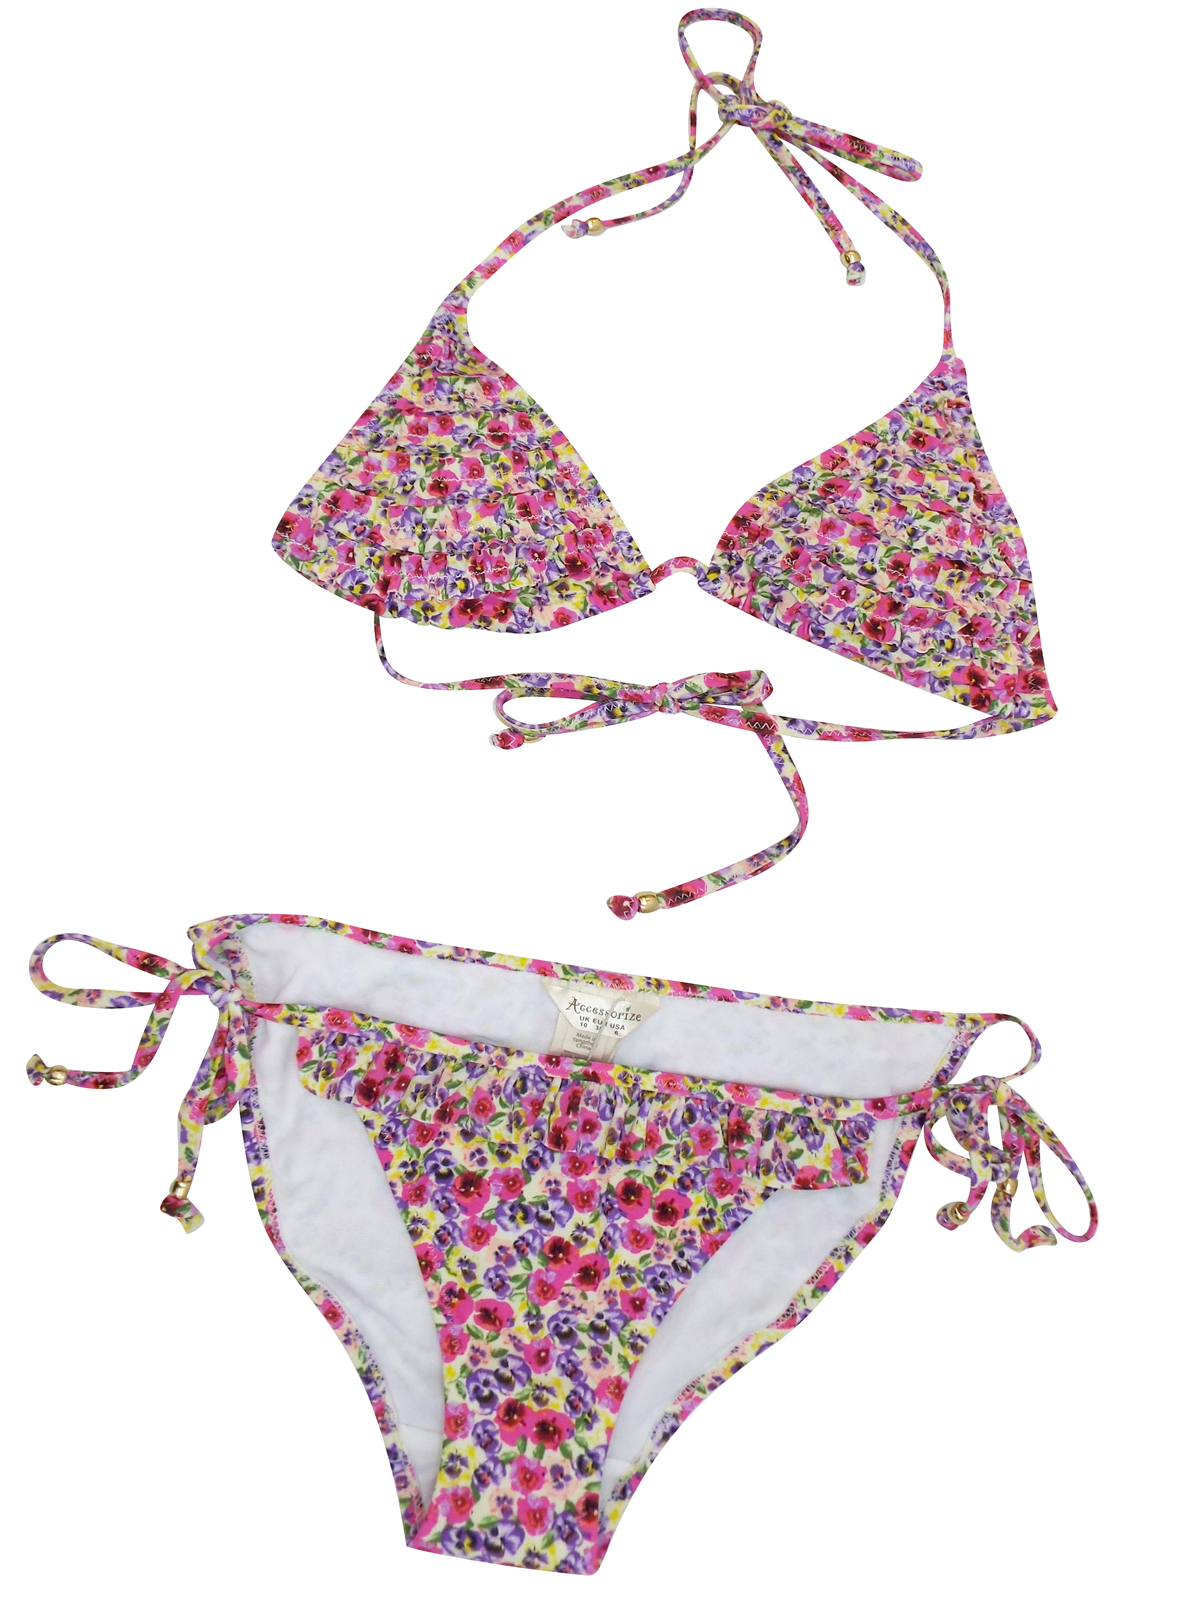 Accessorize PINK Pansy Floral Frilled Triangle Bikini Set - Size 6 to 16